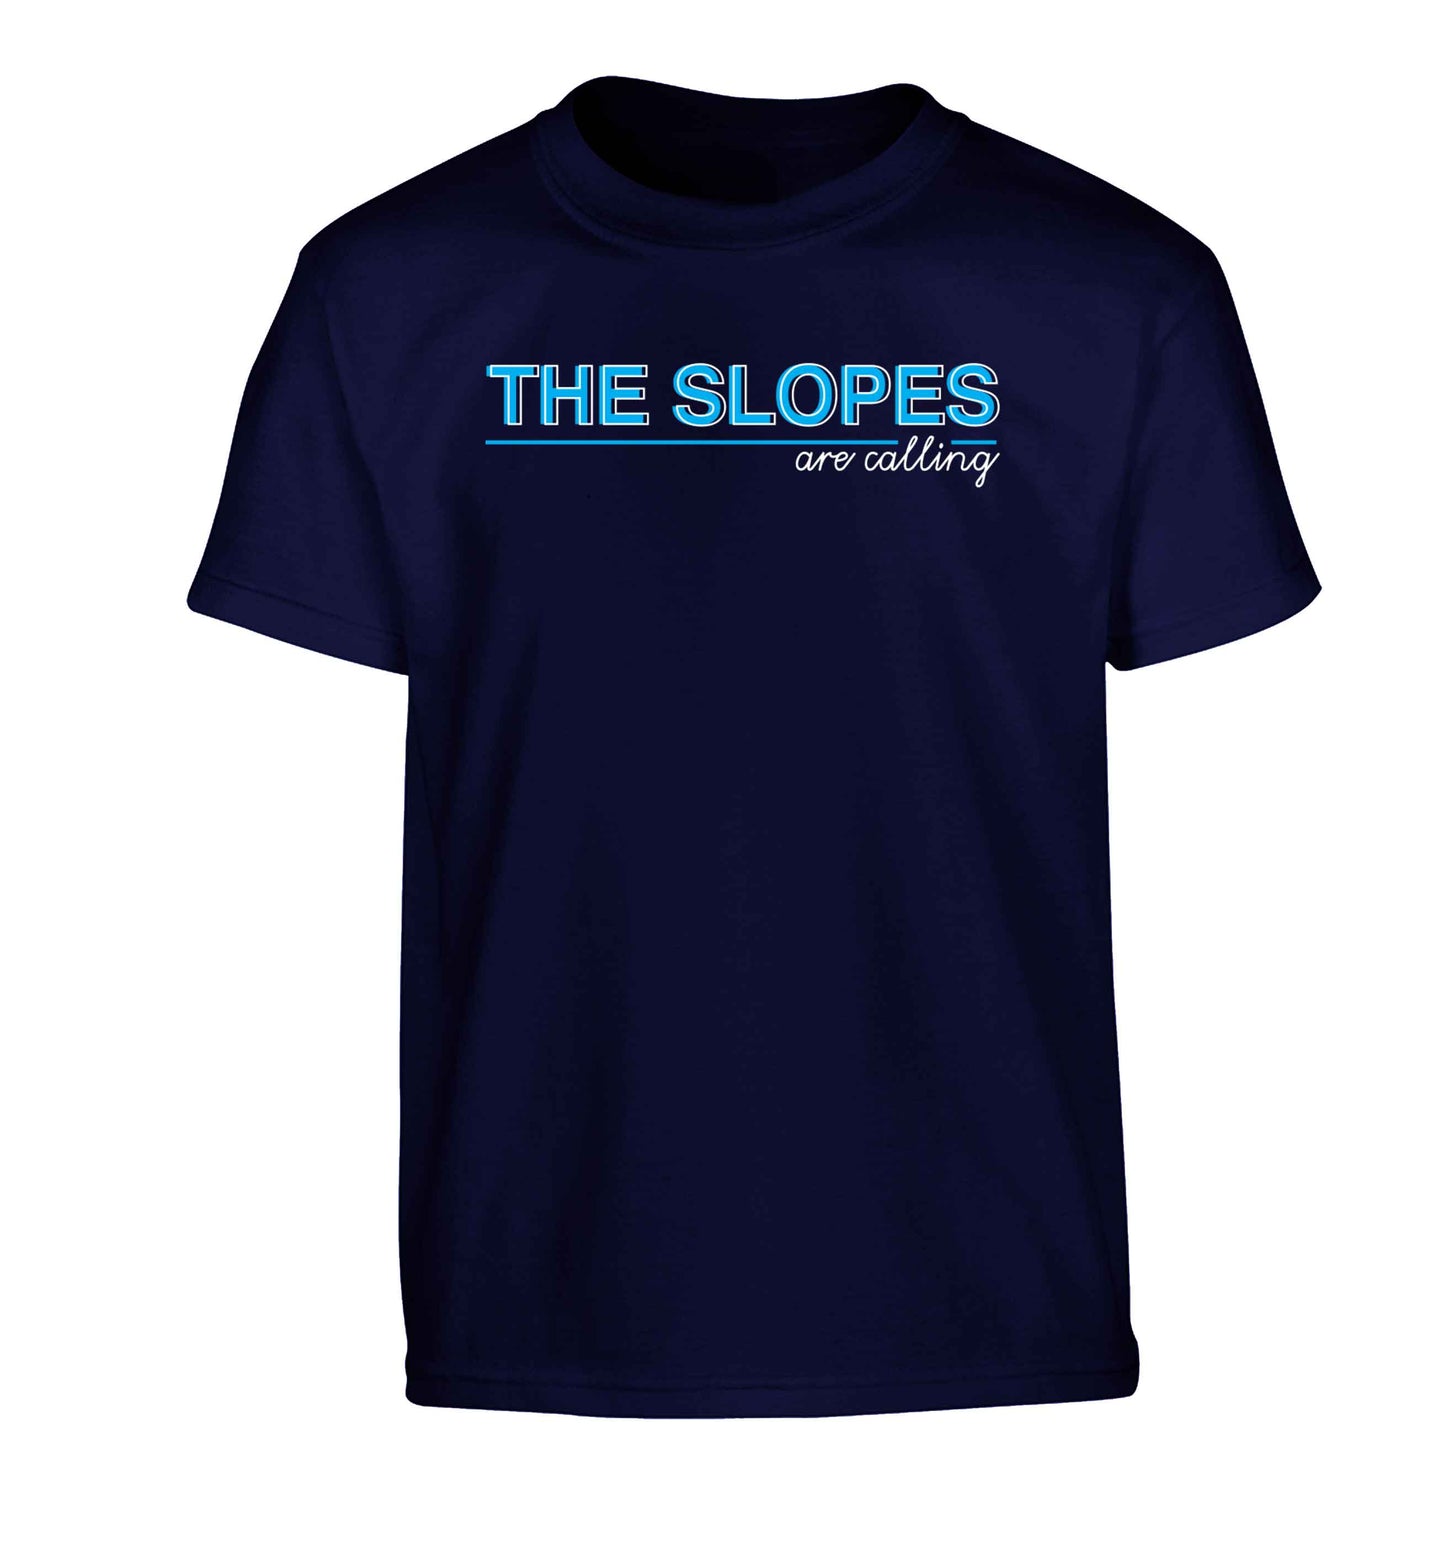 The slopes are calling Children's navy Tshirt 12-13 Years